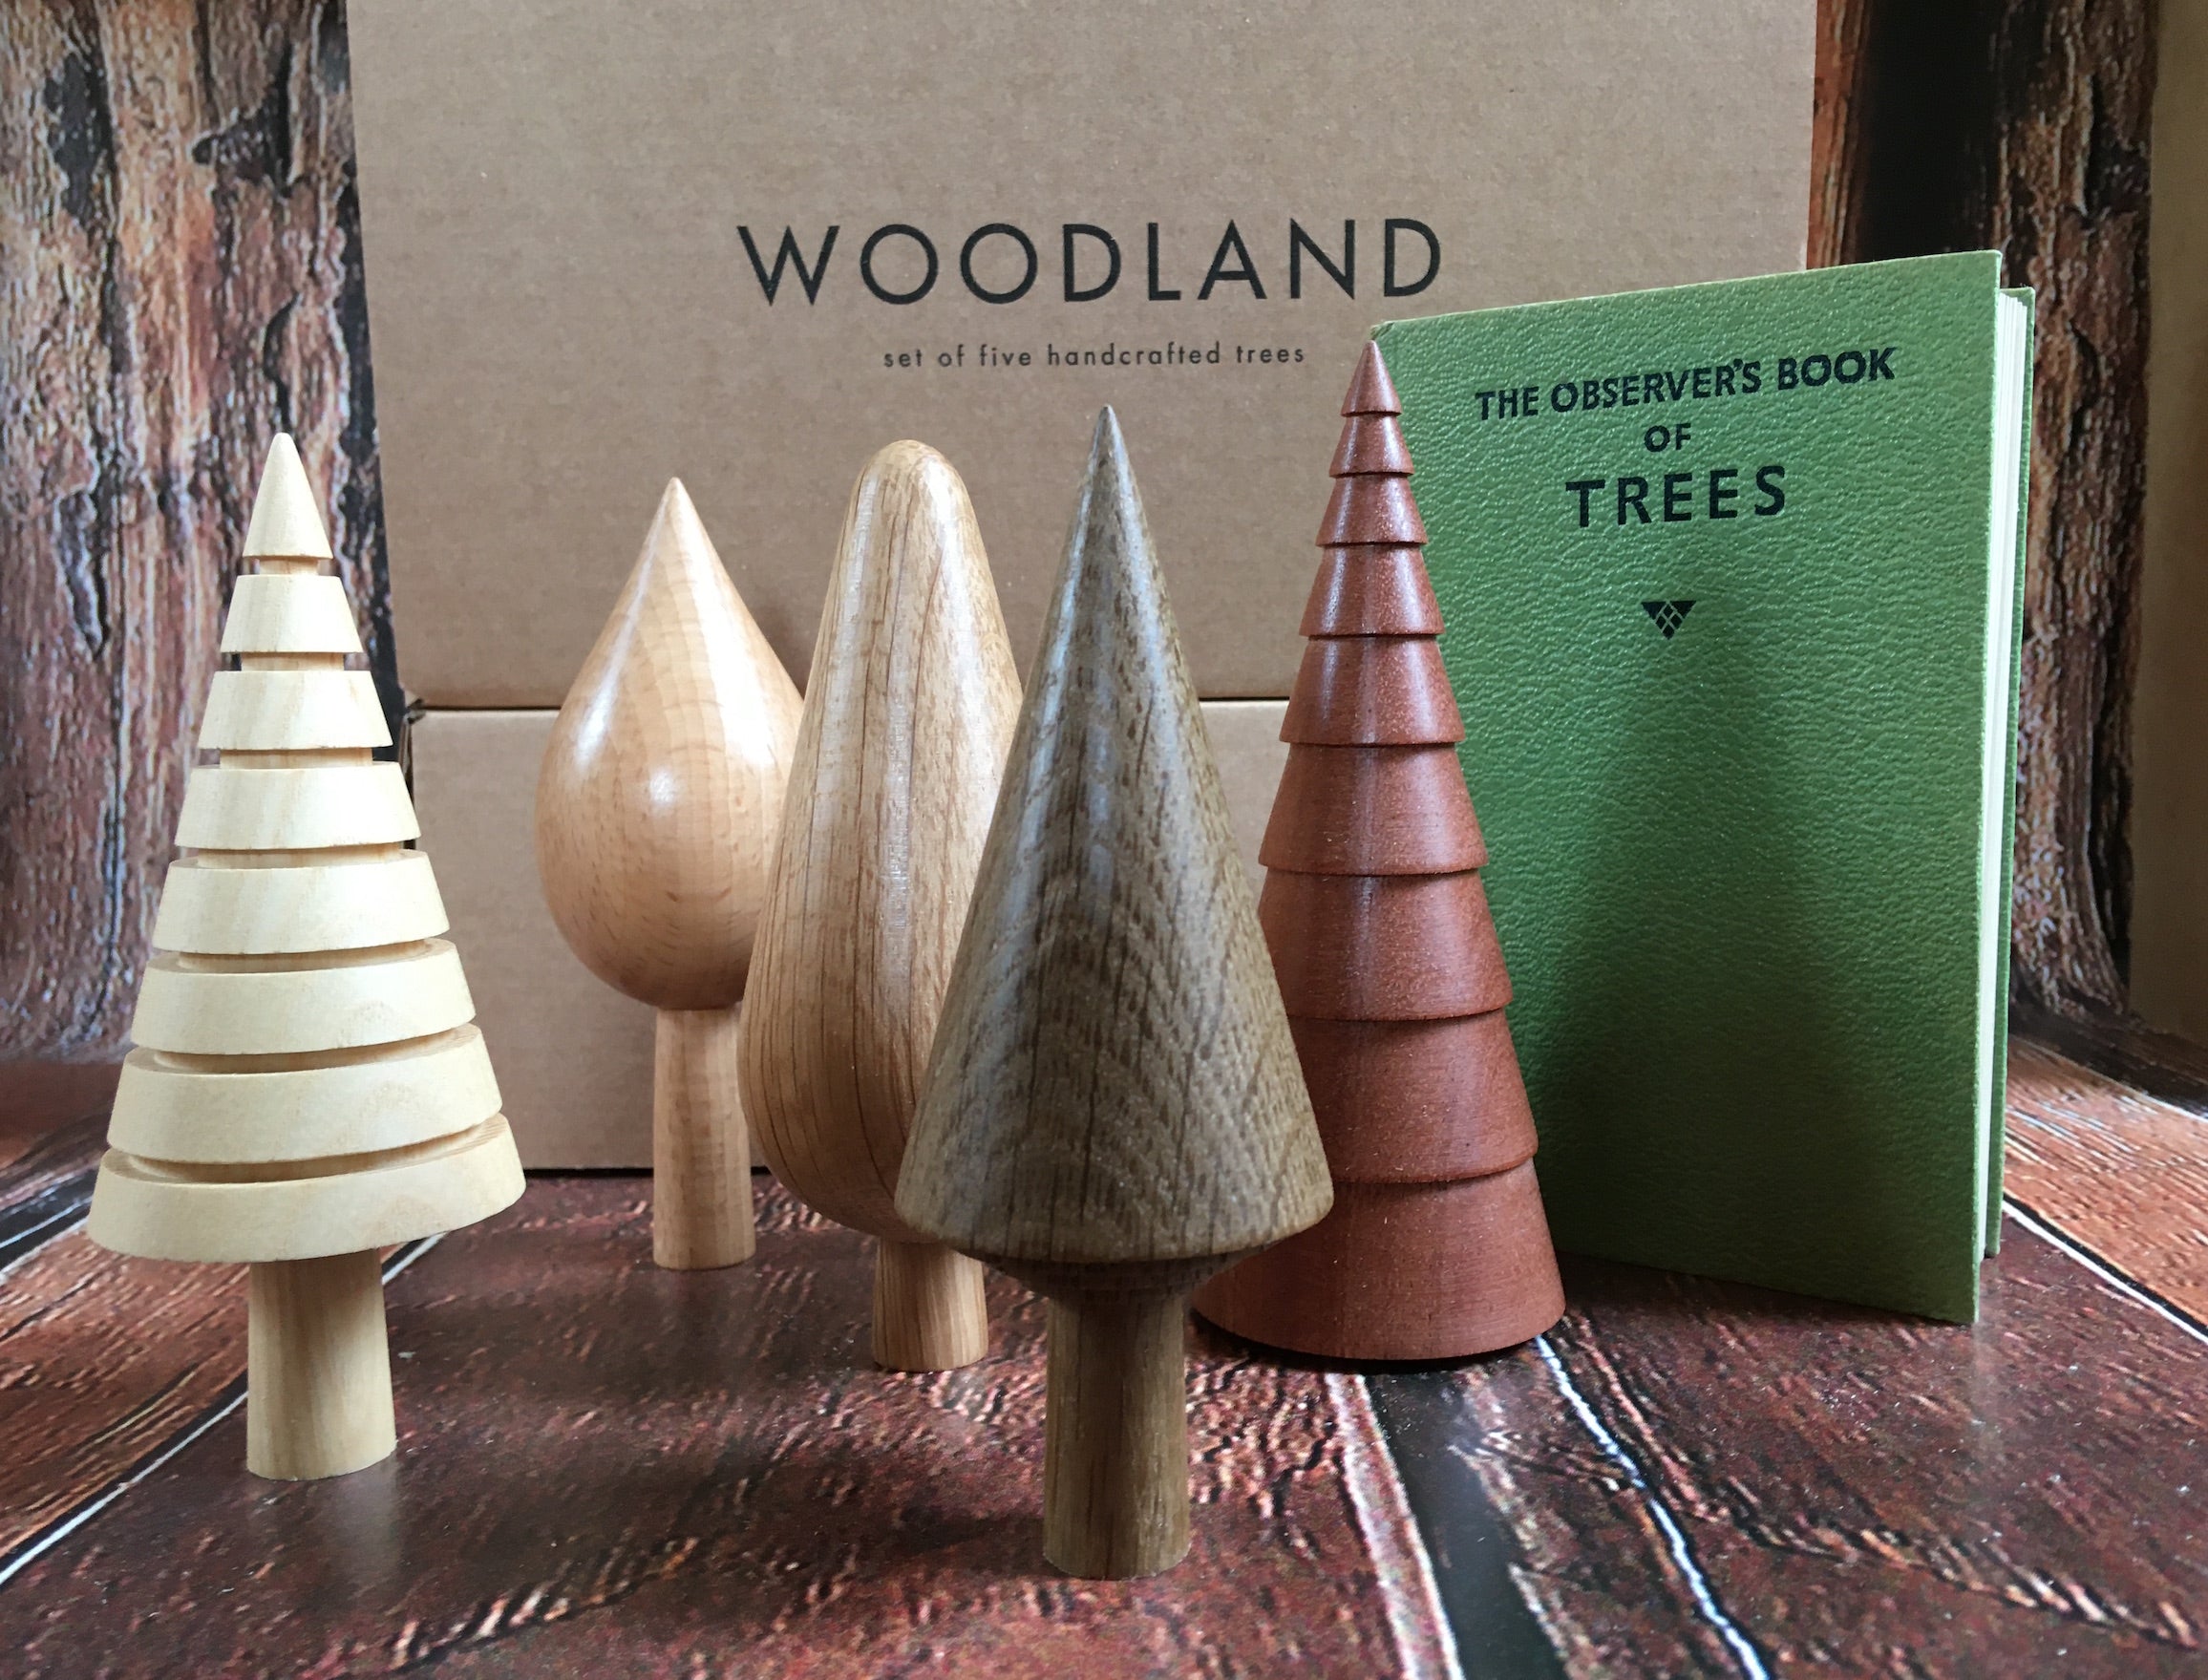 Woodland of Hand Crafted Trees